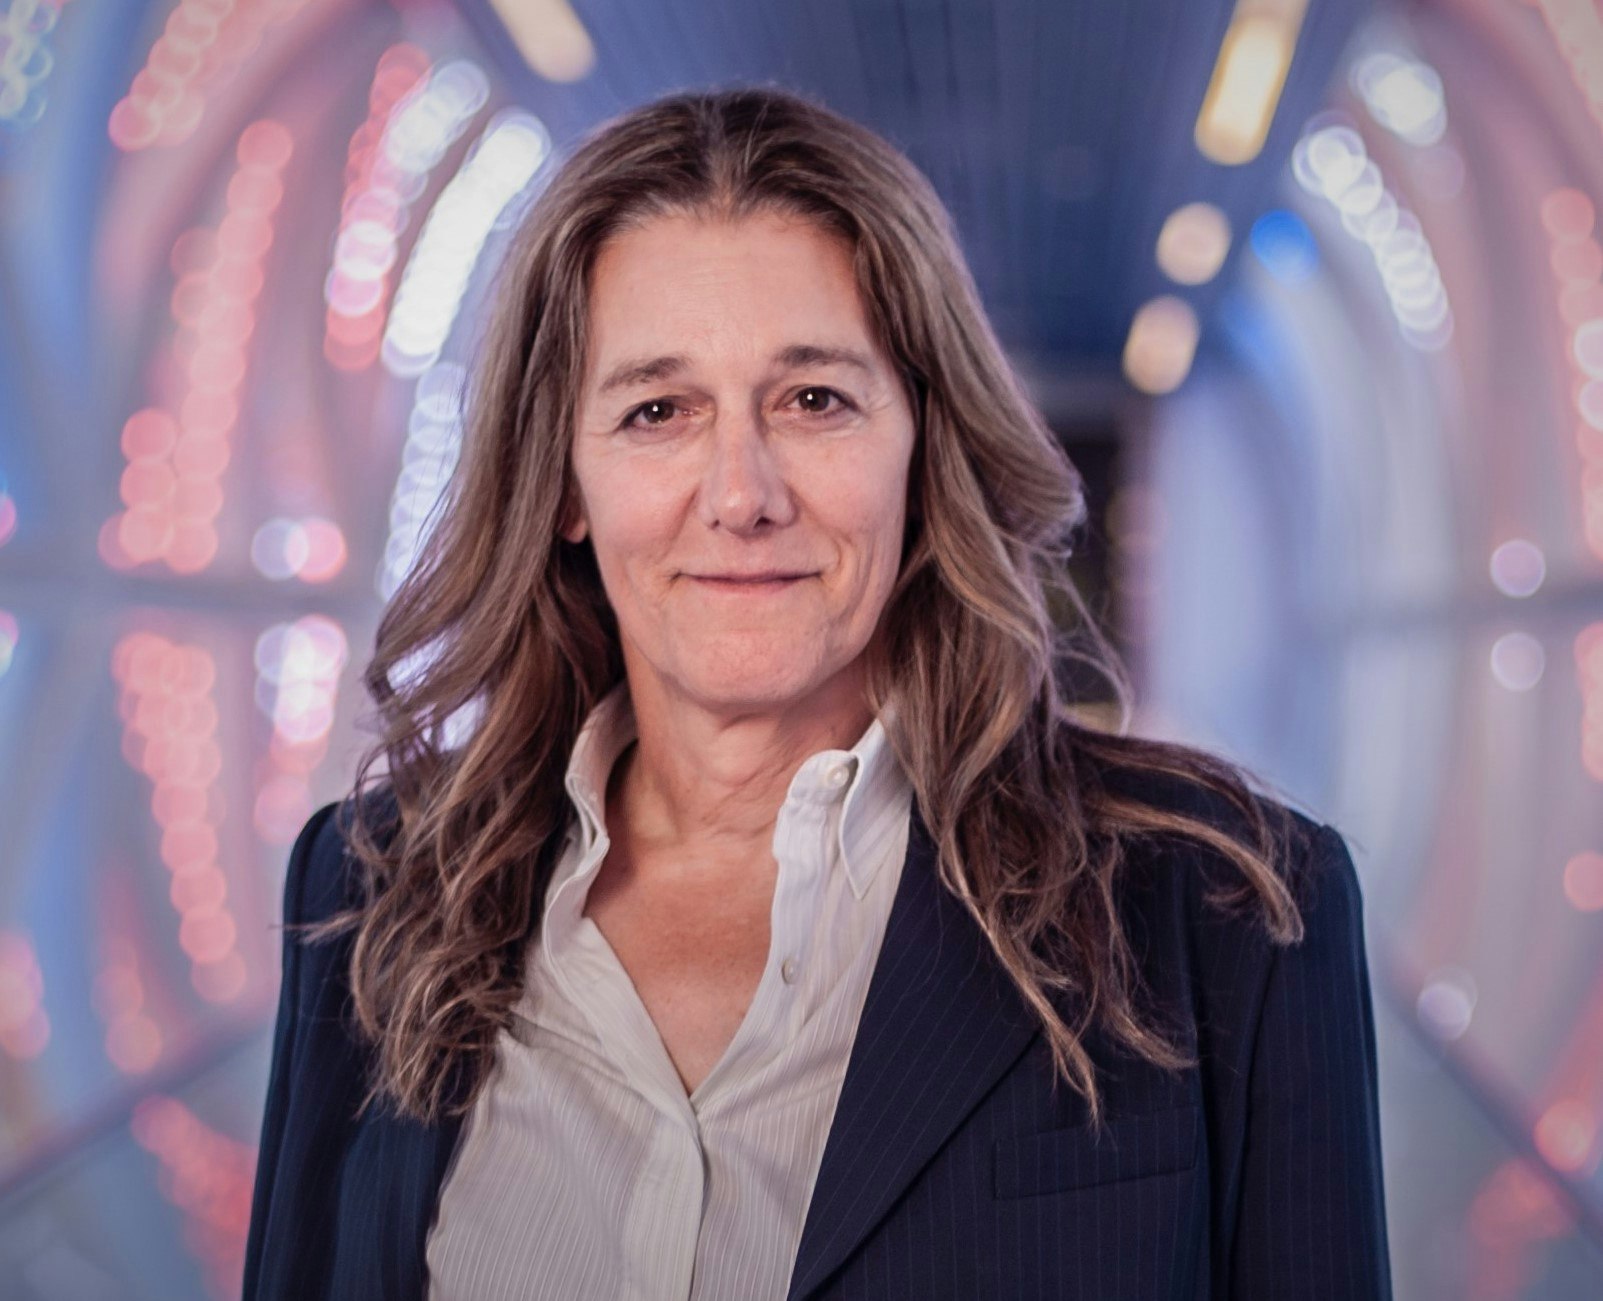 A headshot of Martine Rothblatt, a woman with shoulder-length brown hair, wearing a white shirt and a navy jacket.